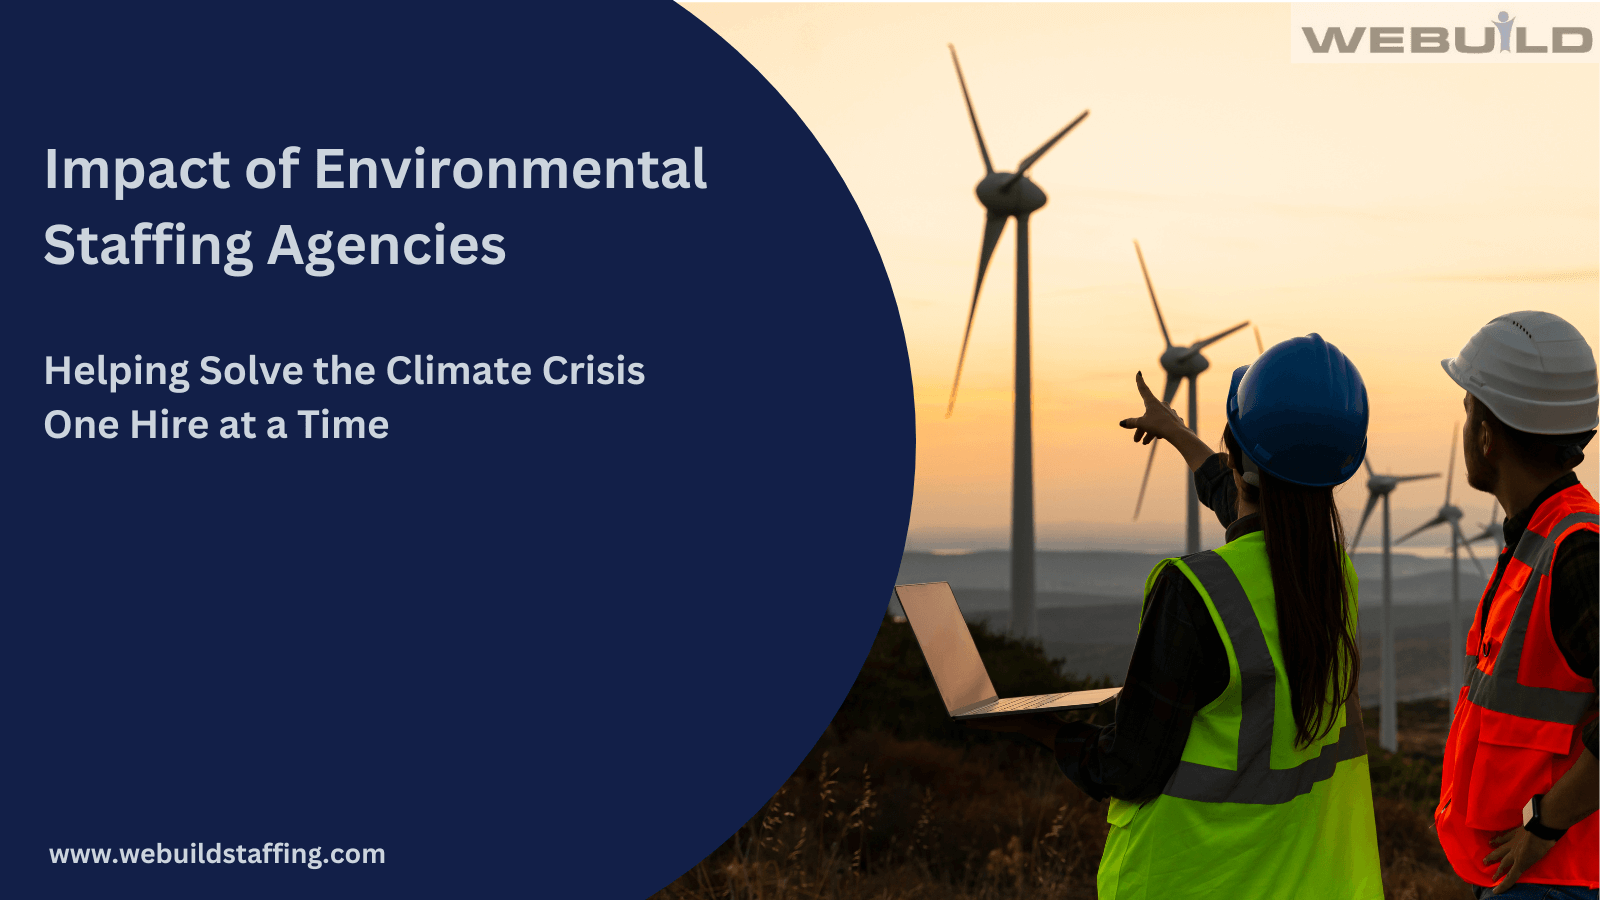 the-impact-of-environmental-staffing-agencies-have-in-solving-the-climate-crisis-one-hire-at-a-time